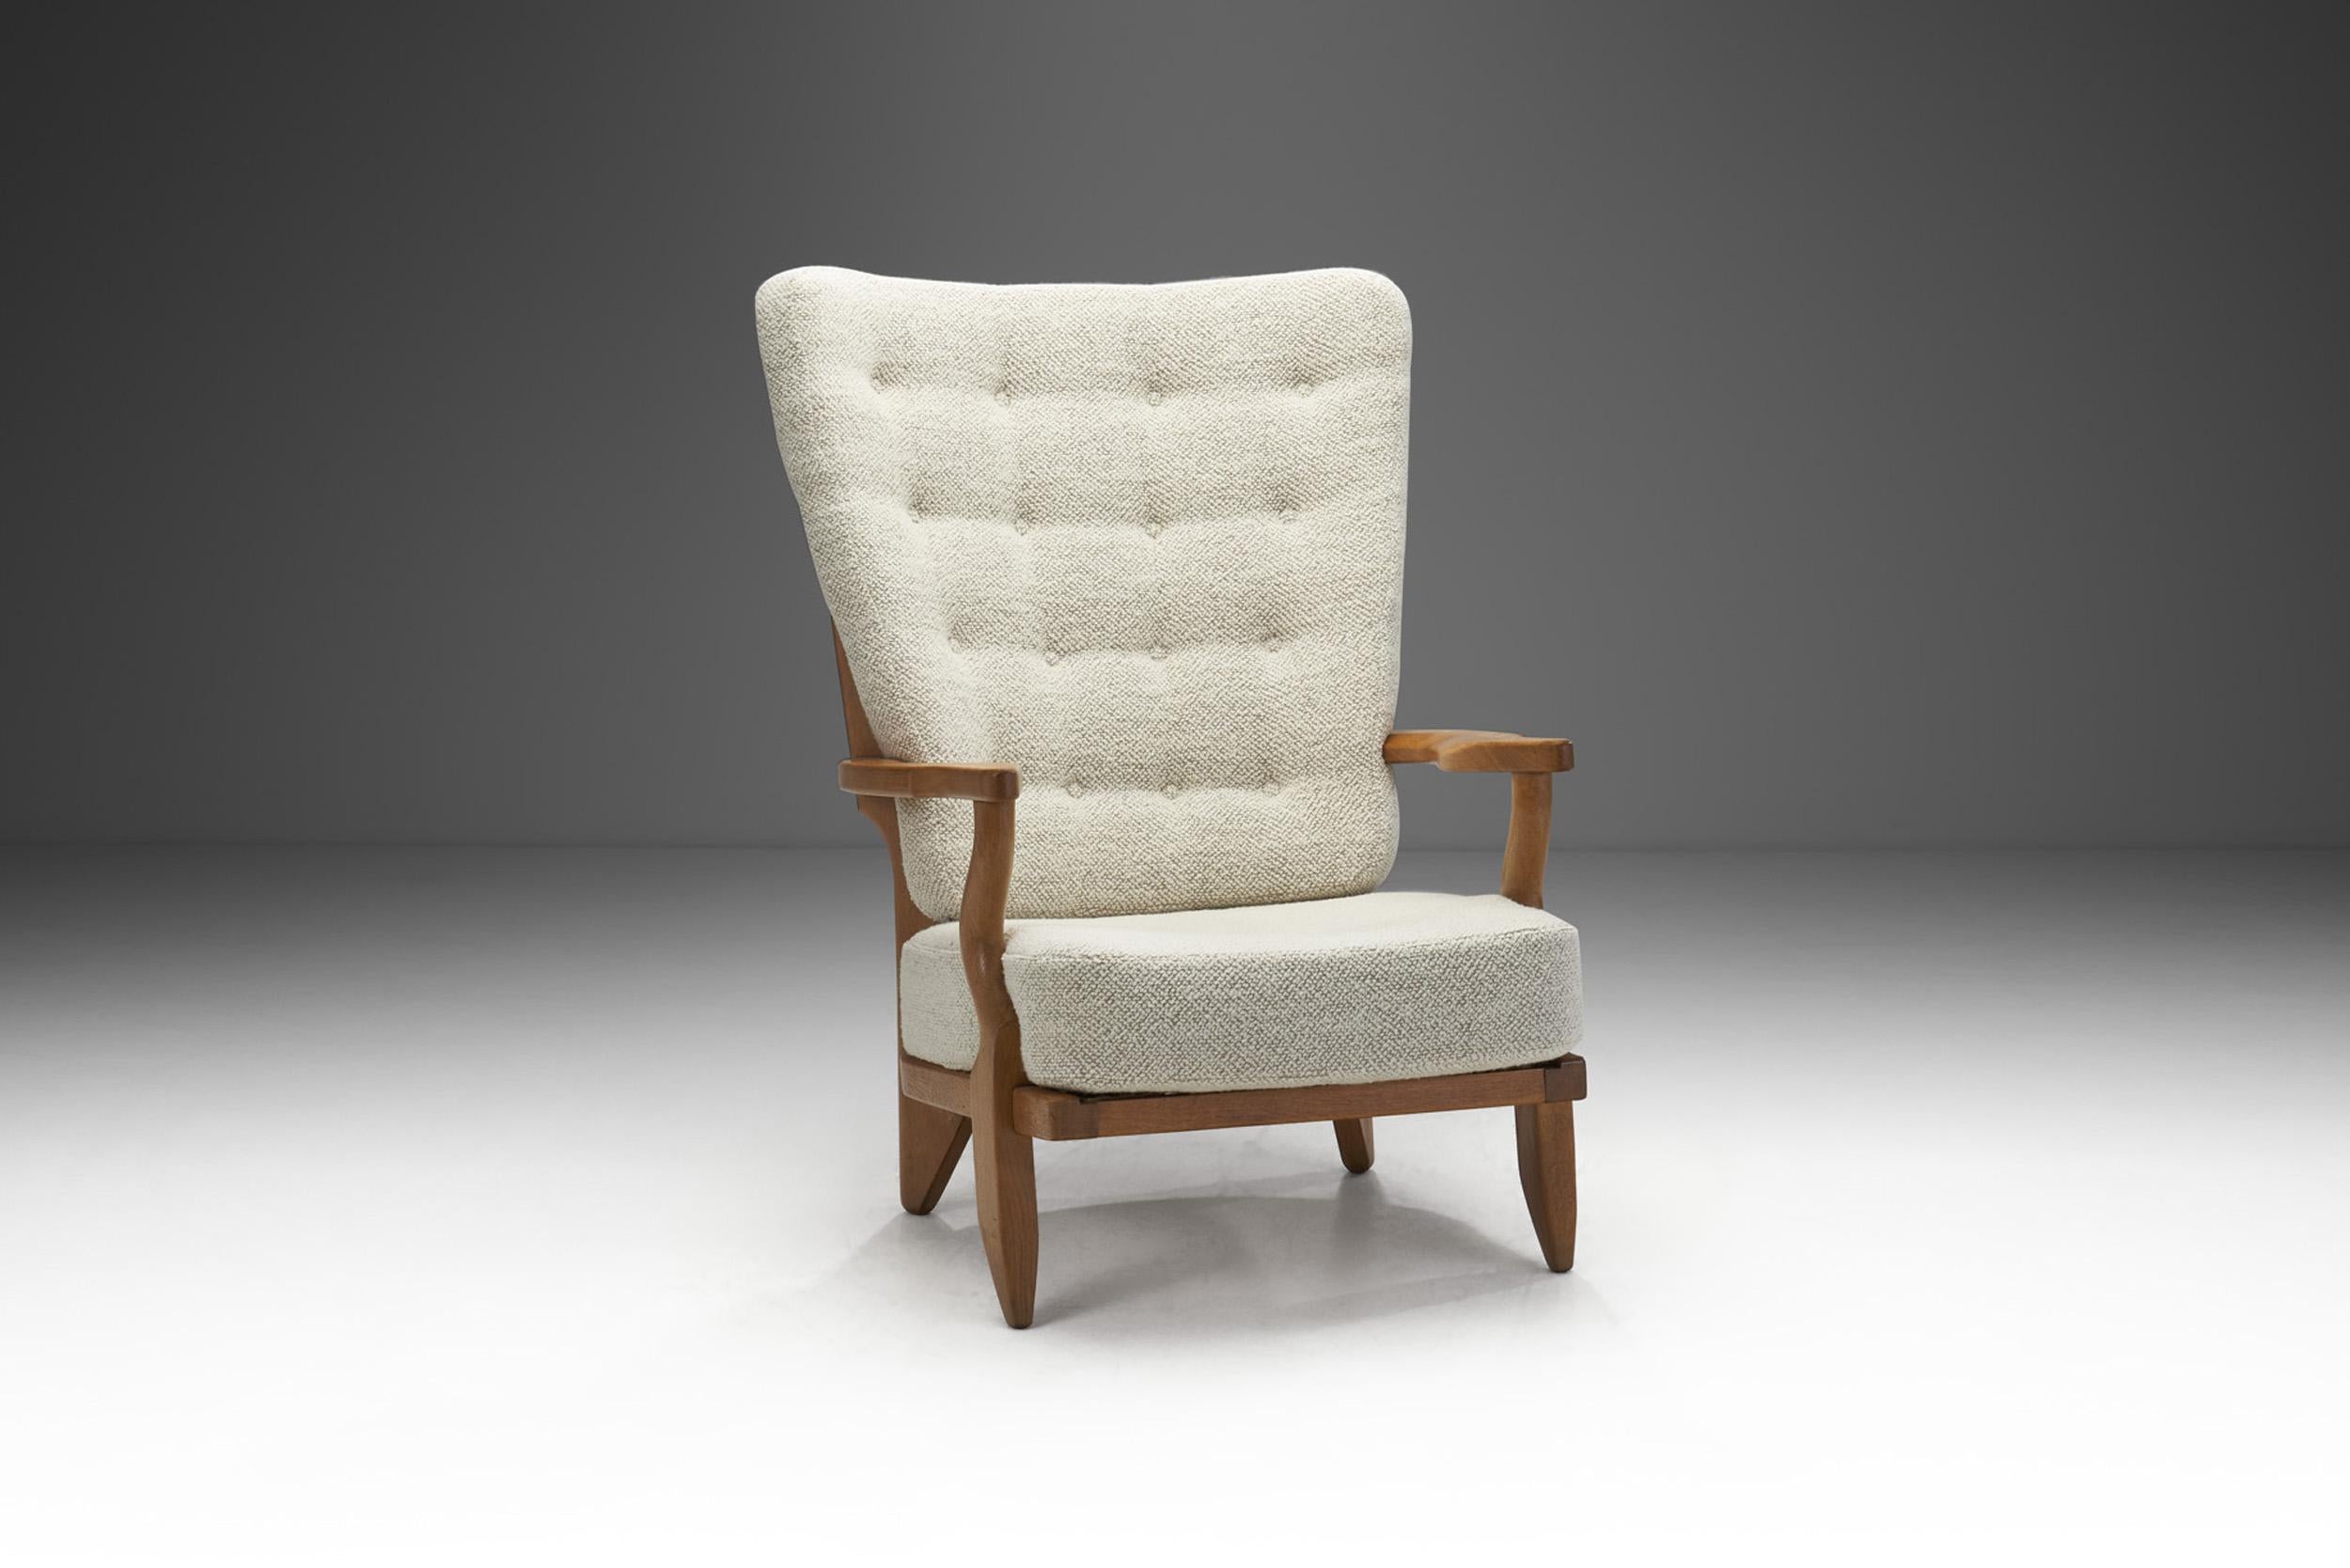 This oaken “Grand Repos” lounge chair deserves its title of iconic, both in terms of quality and design. This model visually represents the very reason Votre Maison, the French duo, Guillerme et Chambron’s company significantly influenced French